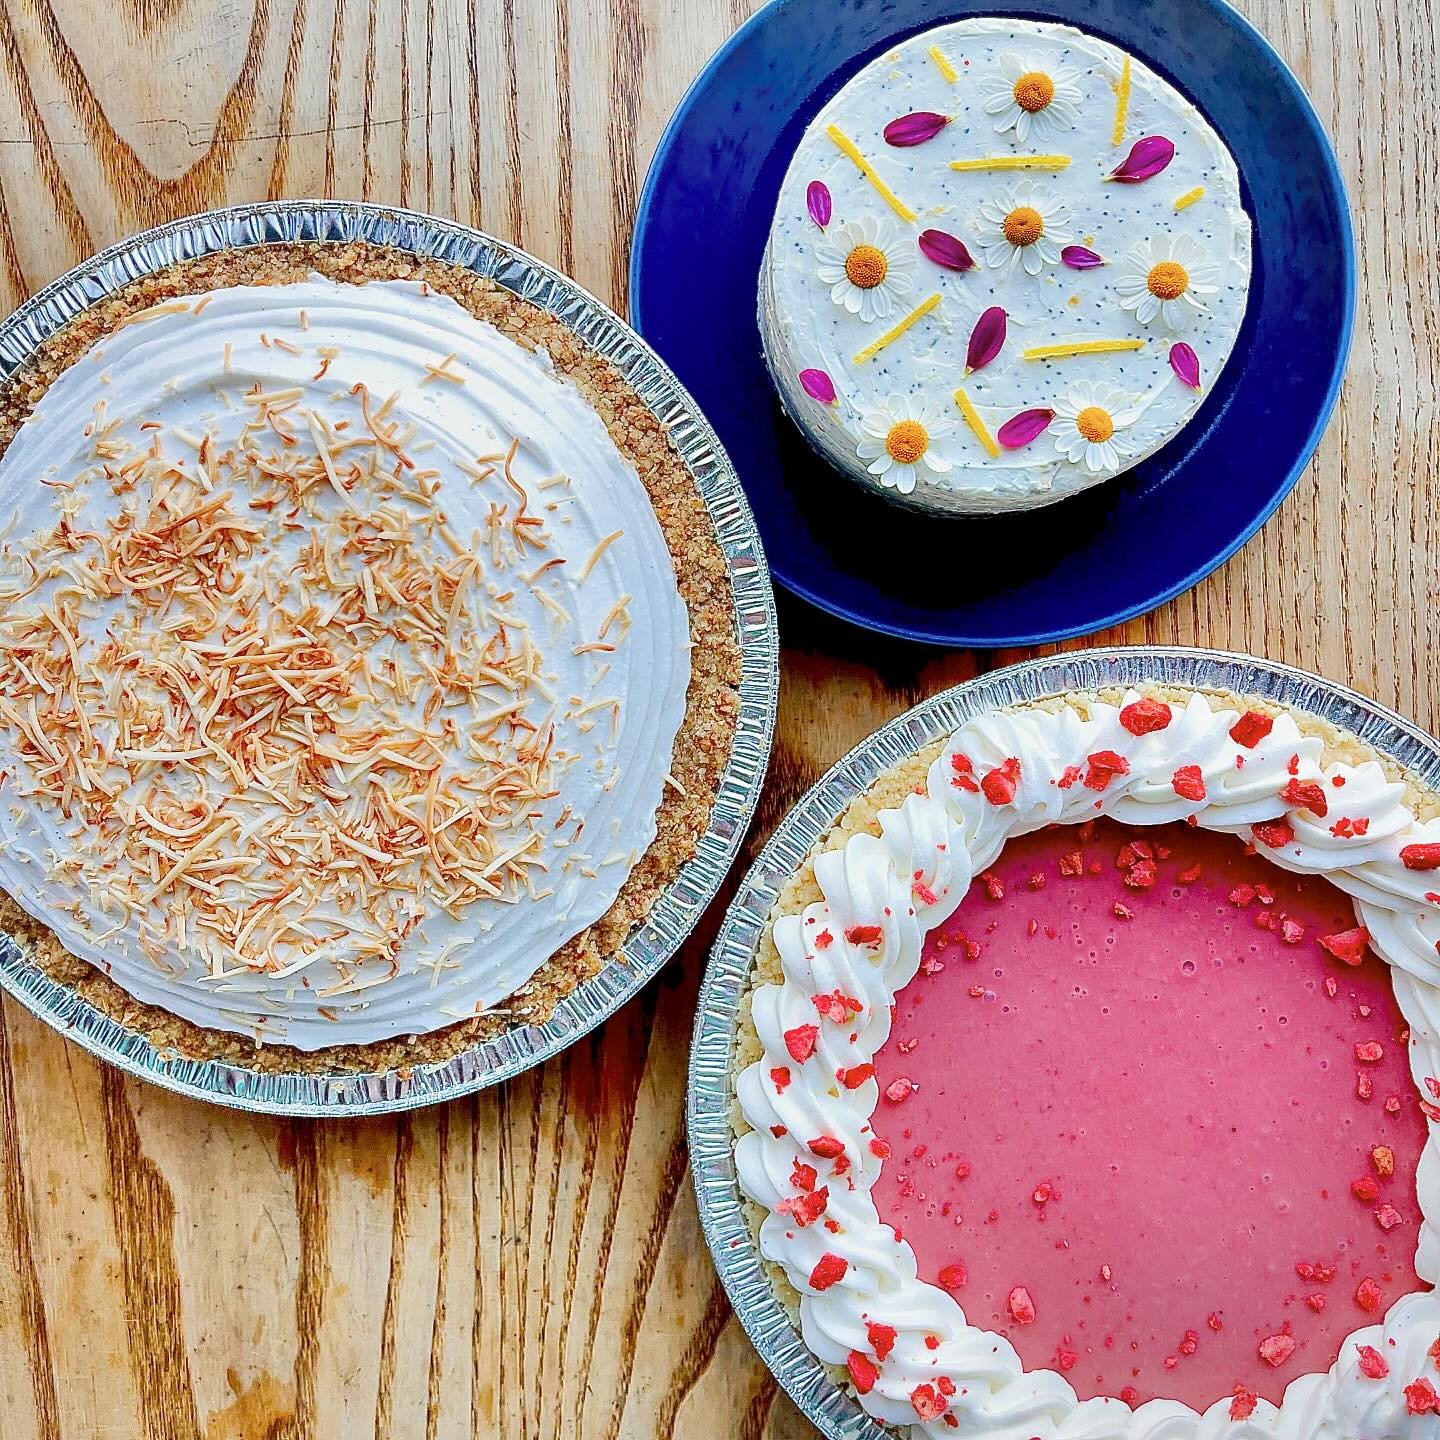 For Mother&rsquo;s Day weekend &mdash; that&rsquo;s THIS weekend! Sat 5/11 + Sun 5/12 &mdash; pastry chef @saam.robinson is baking this $20 mini cake:

LAVENDER MILK TEA SPONGE CAKE
brambleberry jam, lemon poppy seed buttercream

Sam can also bake a 